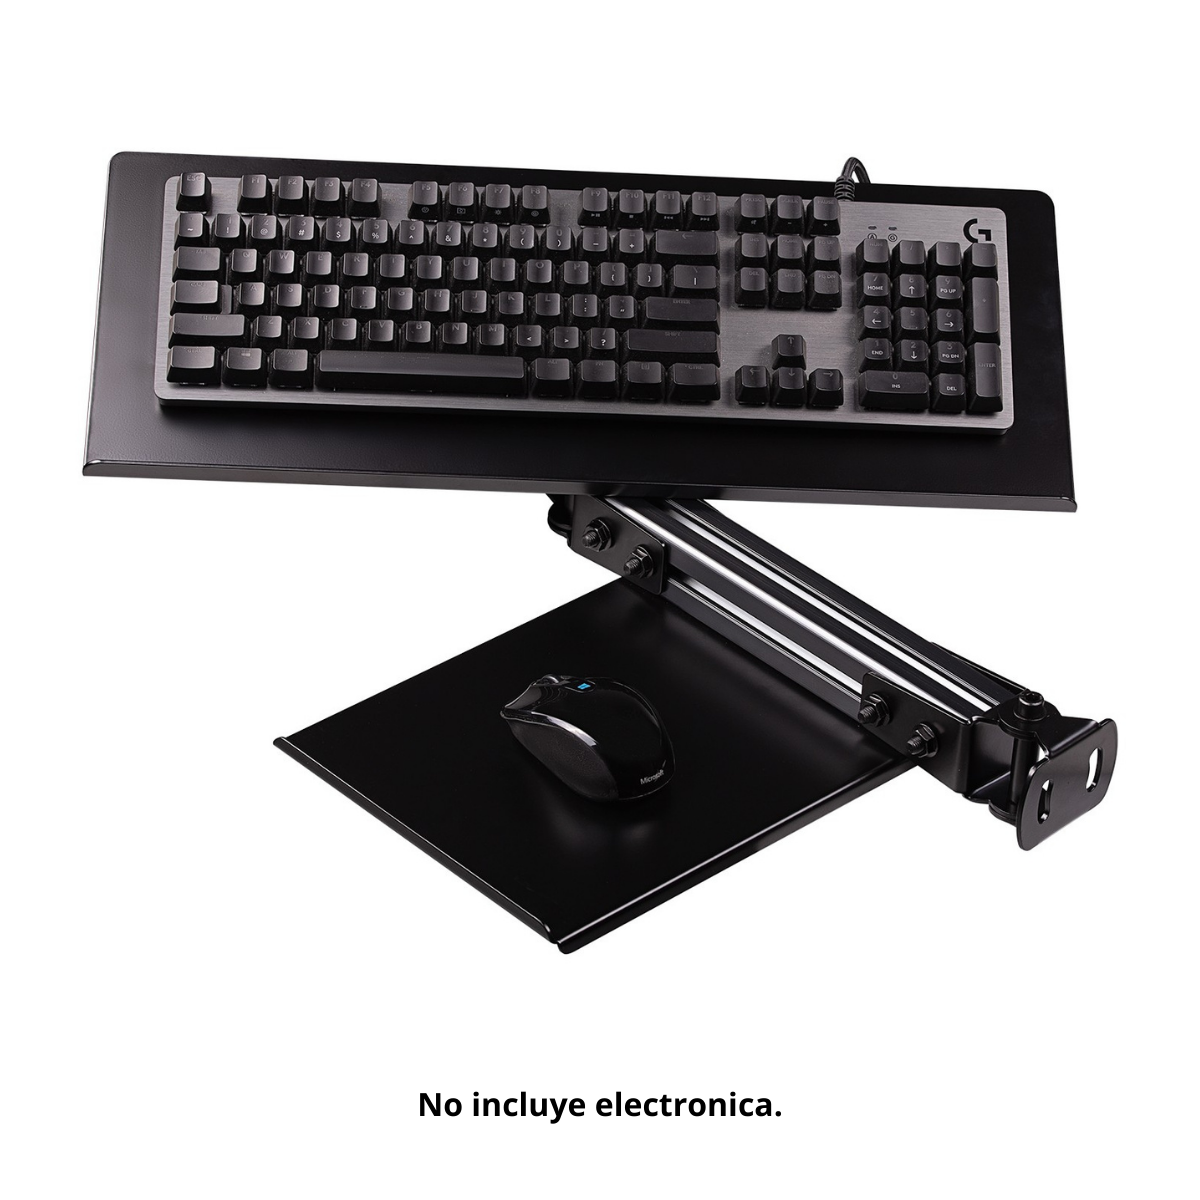 NEXT LEVEL RACING NLR-E010 MOUSE TRAY & KEYBOARD ELITE